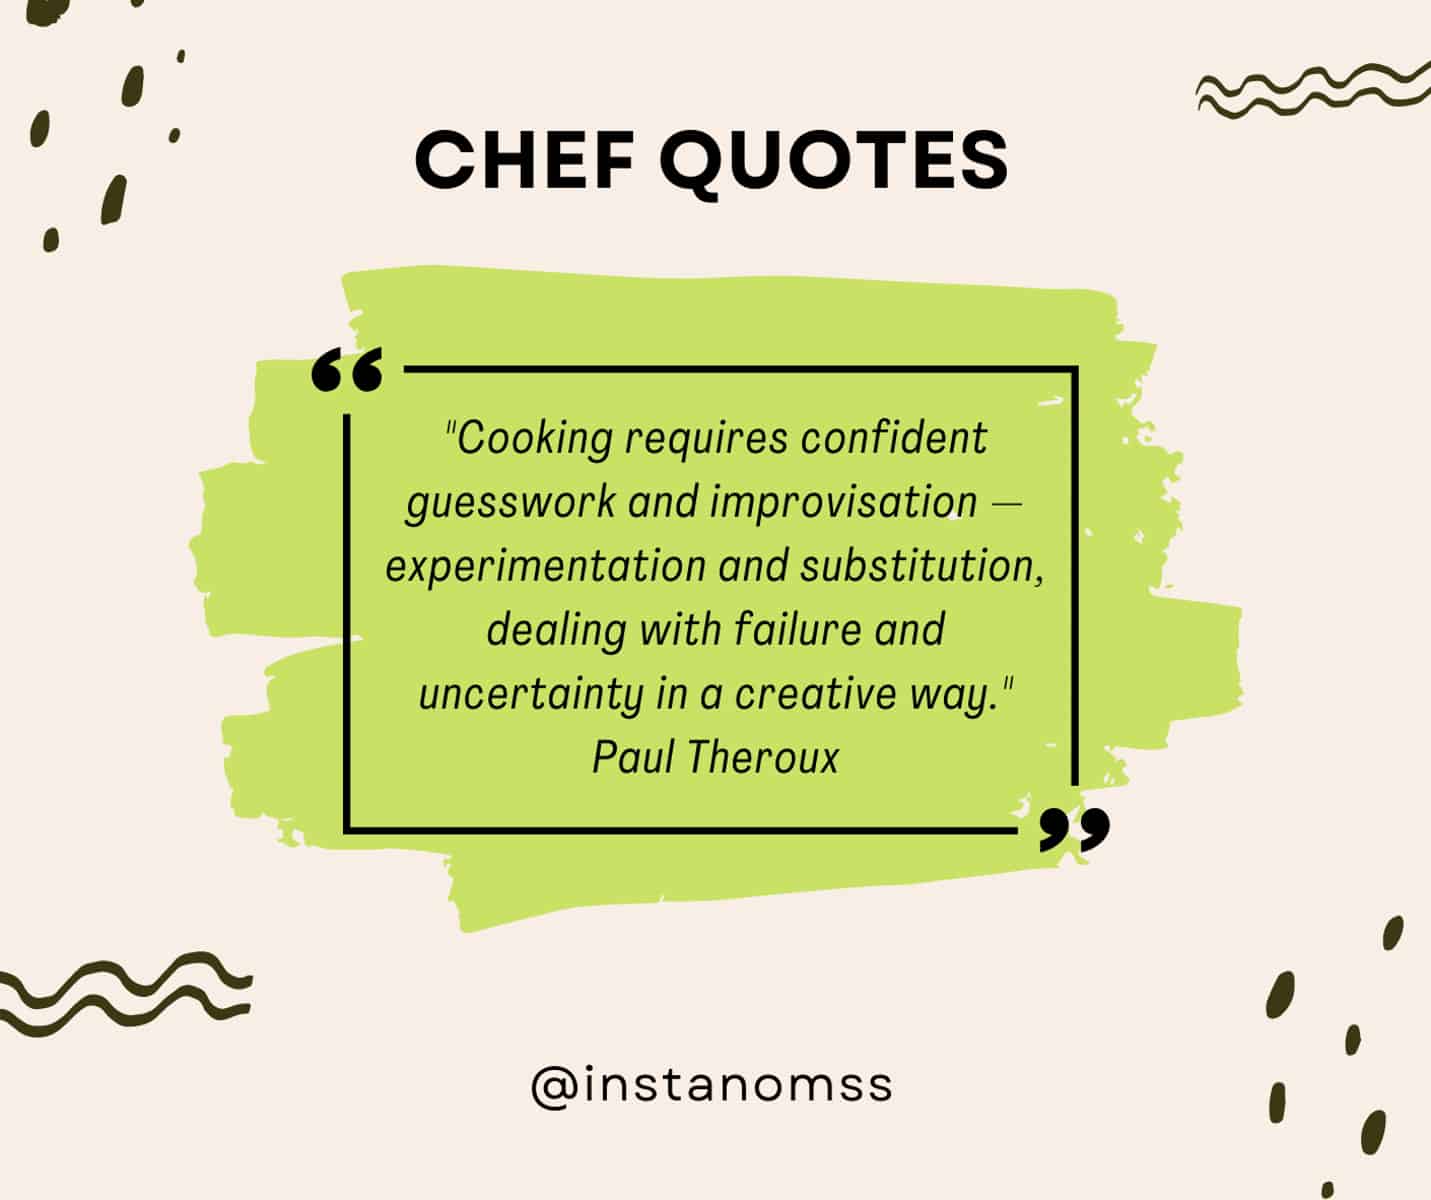 "Cooking requires confident guesswork and improvisation — experimentation and substitution, dealing with failure and uncertainty in a creative way." Paul Theroux